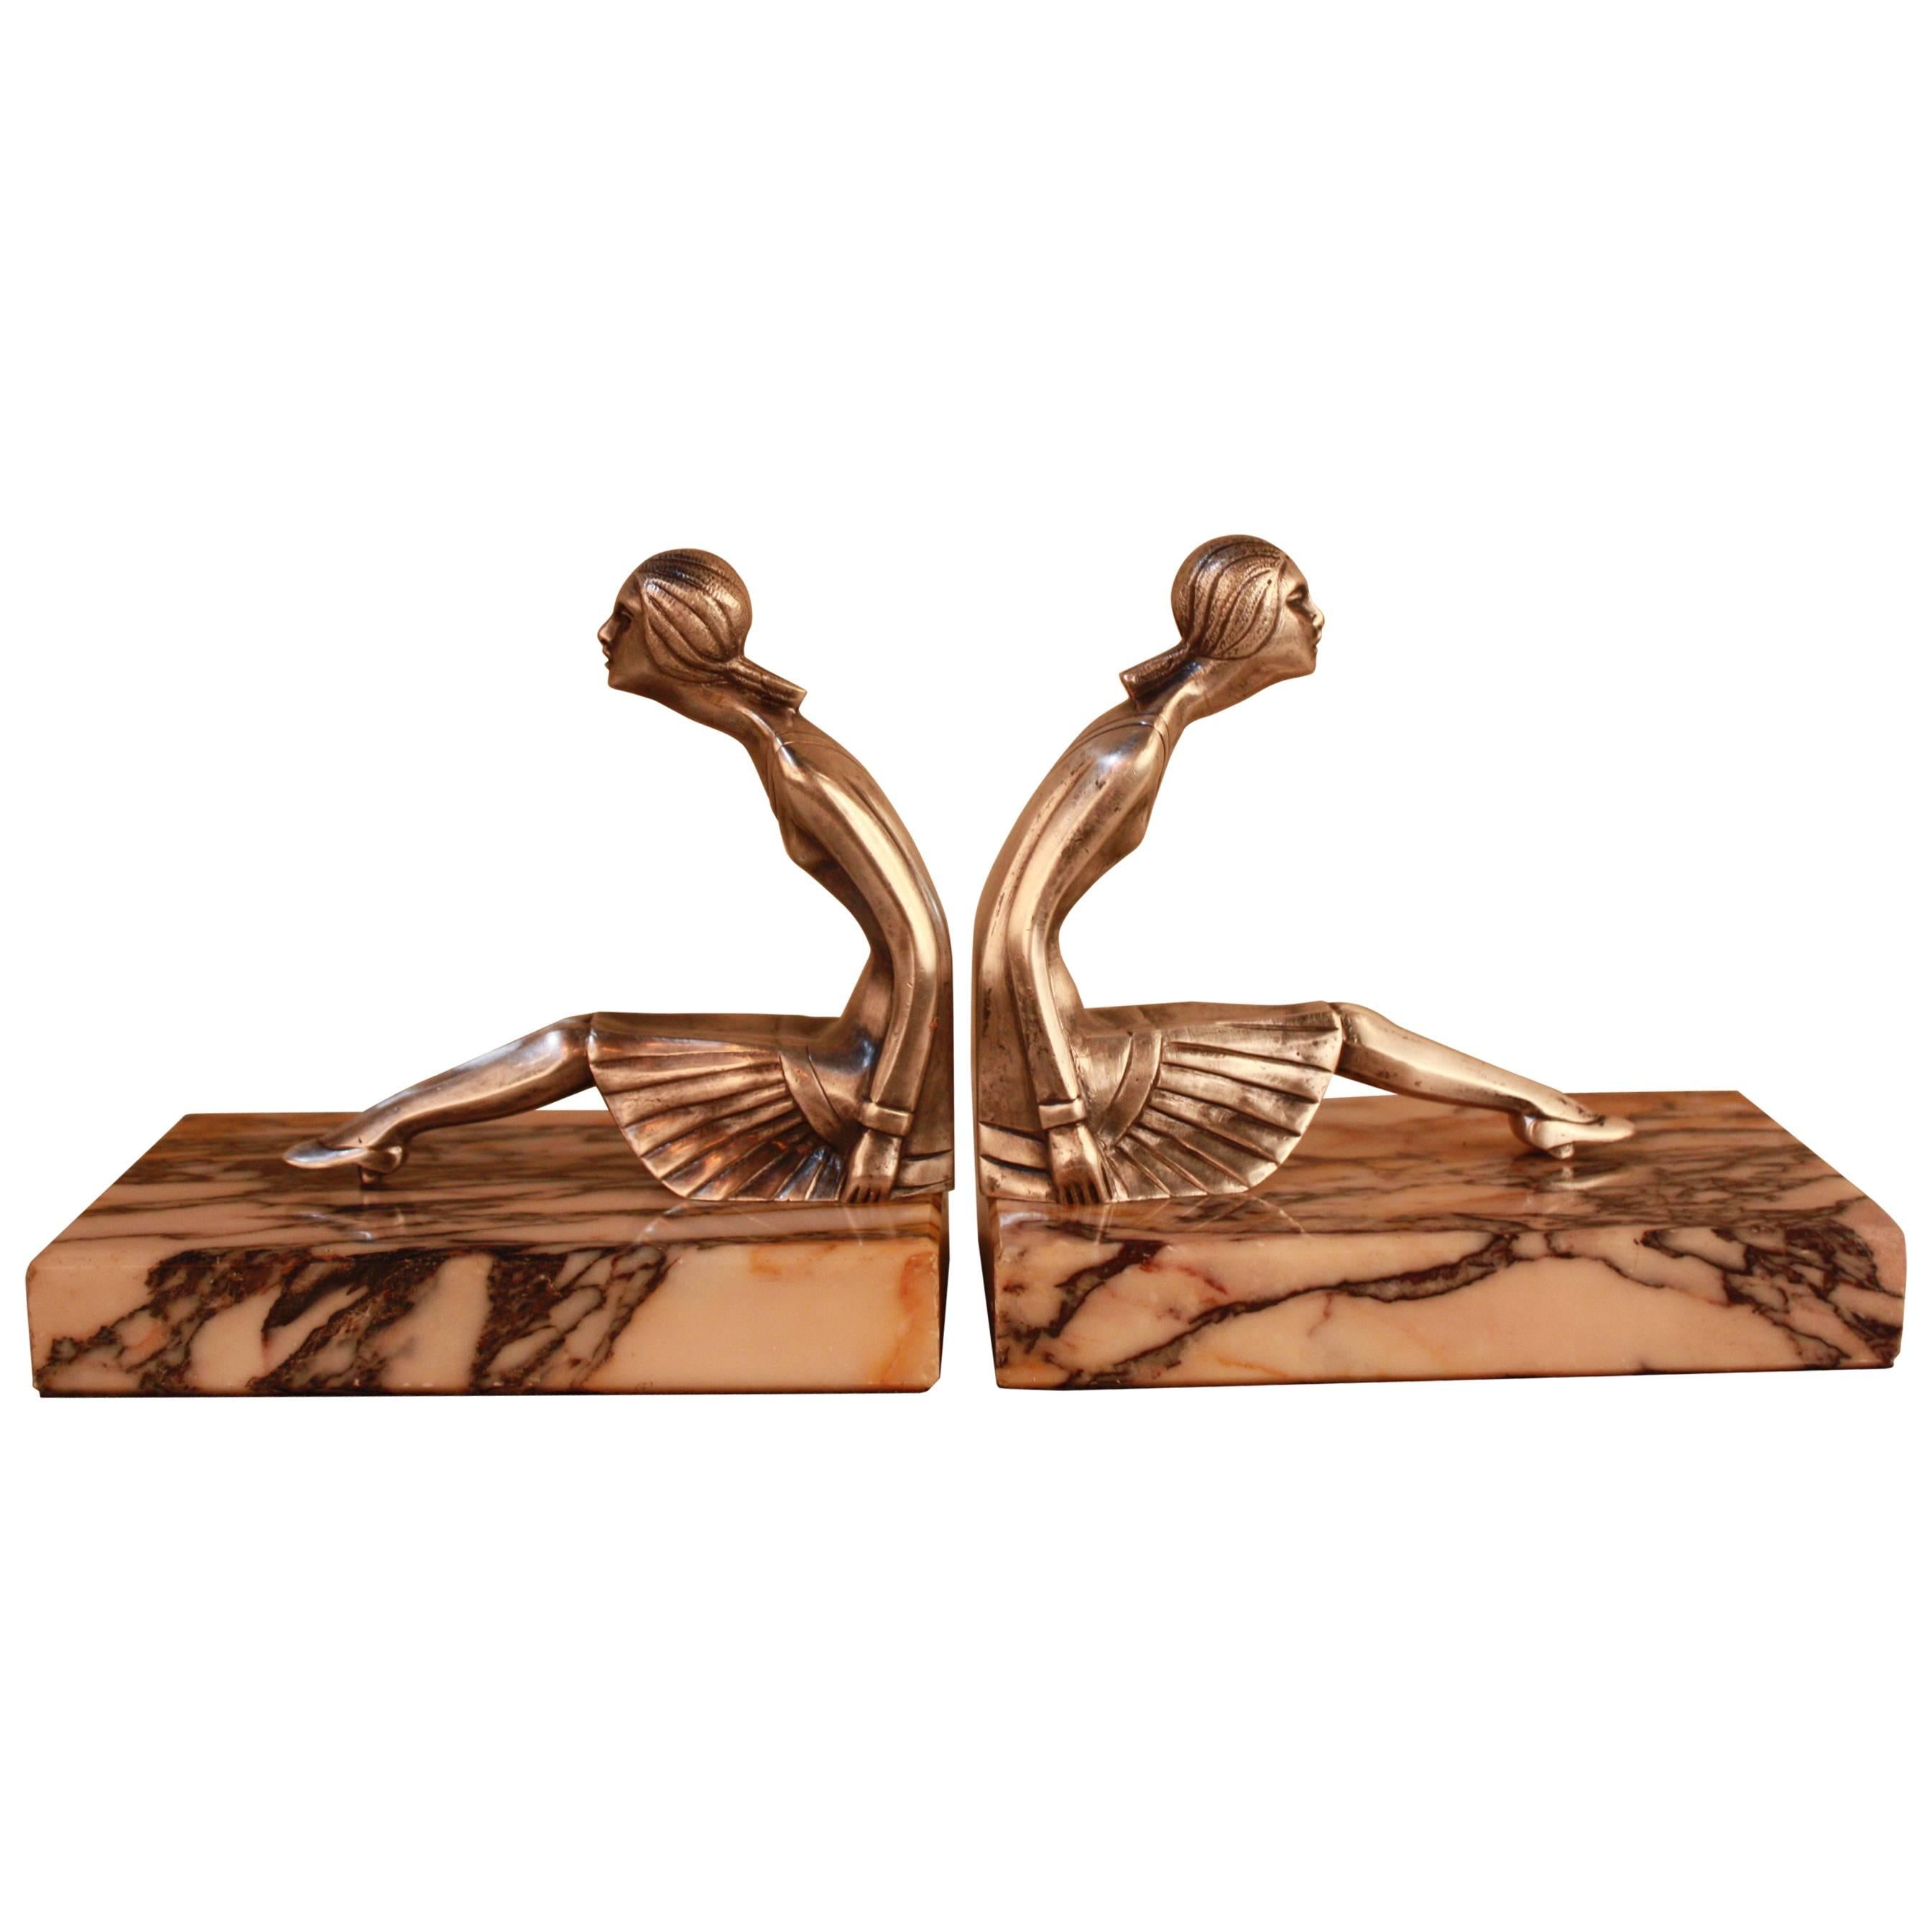 French Silver on Bronze Art Deco Bookends